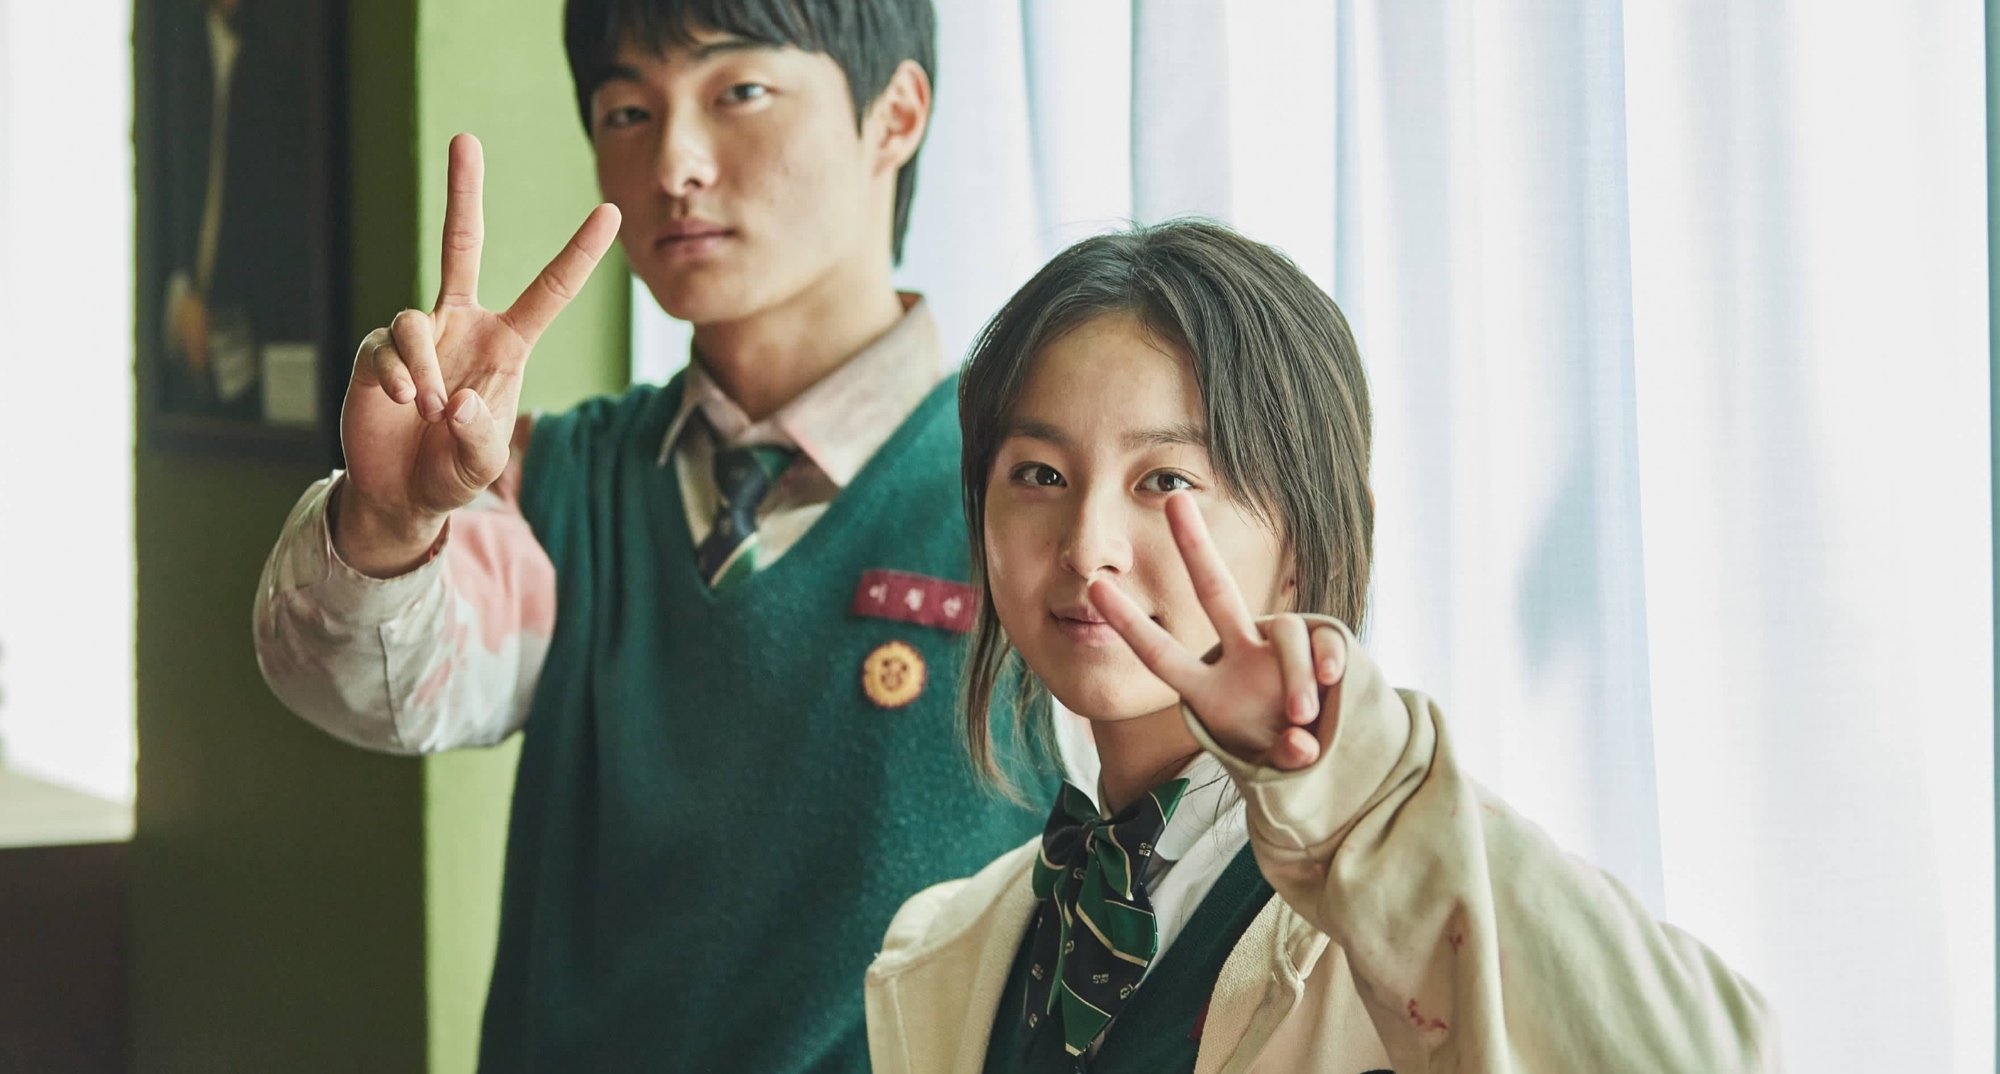 Actors Yoon Chan-young and Park Ji-hoo for 'All of Us Are Dead' wearing school uniforms in classroom